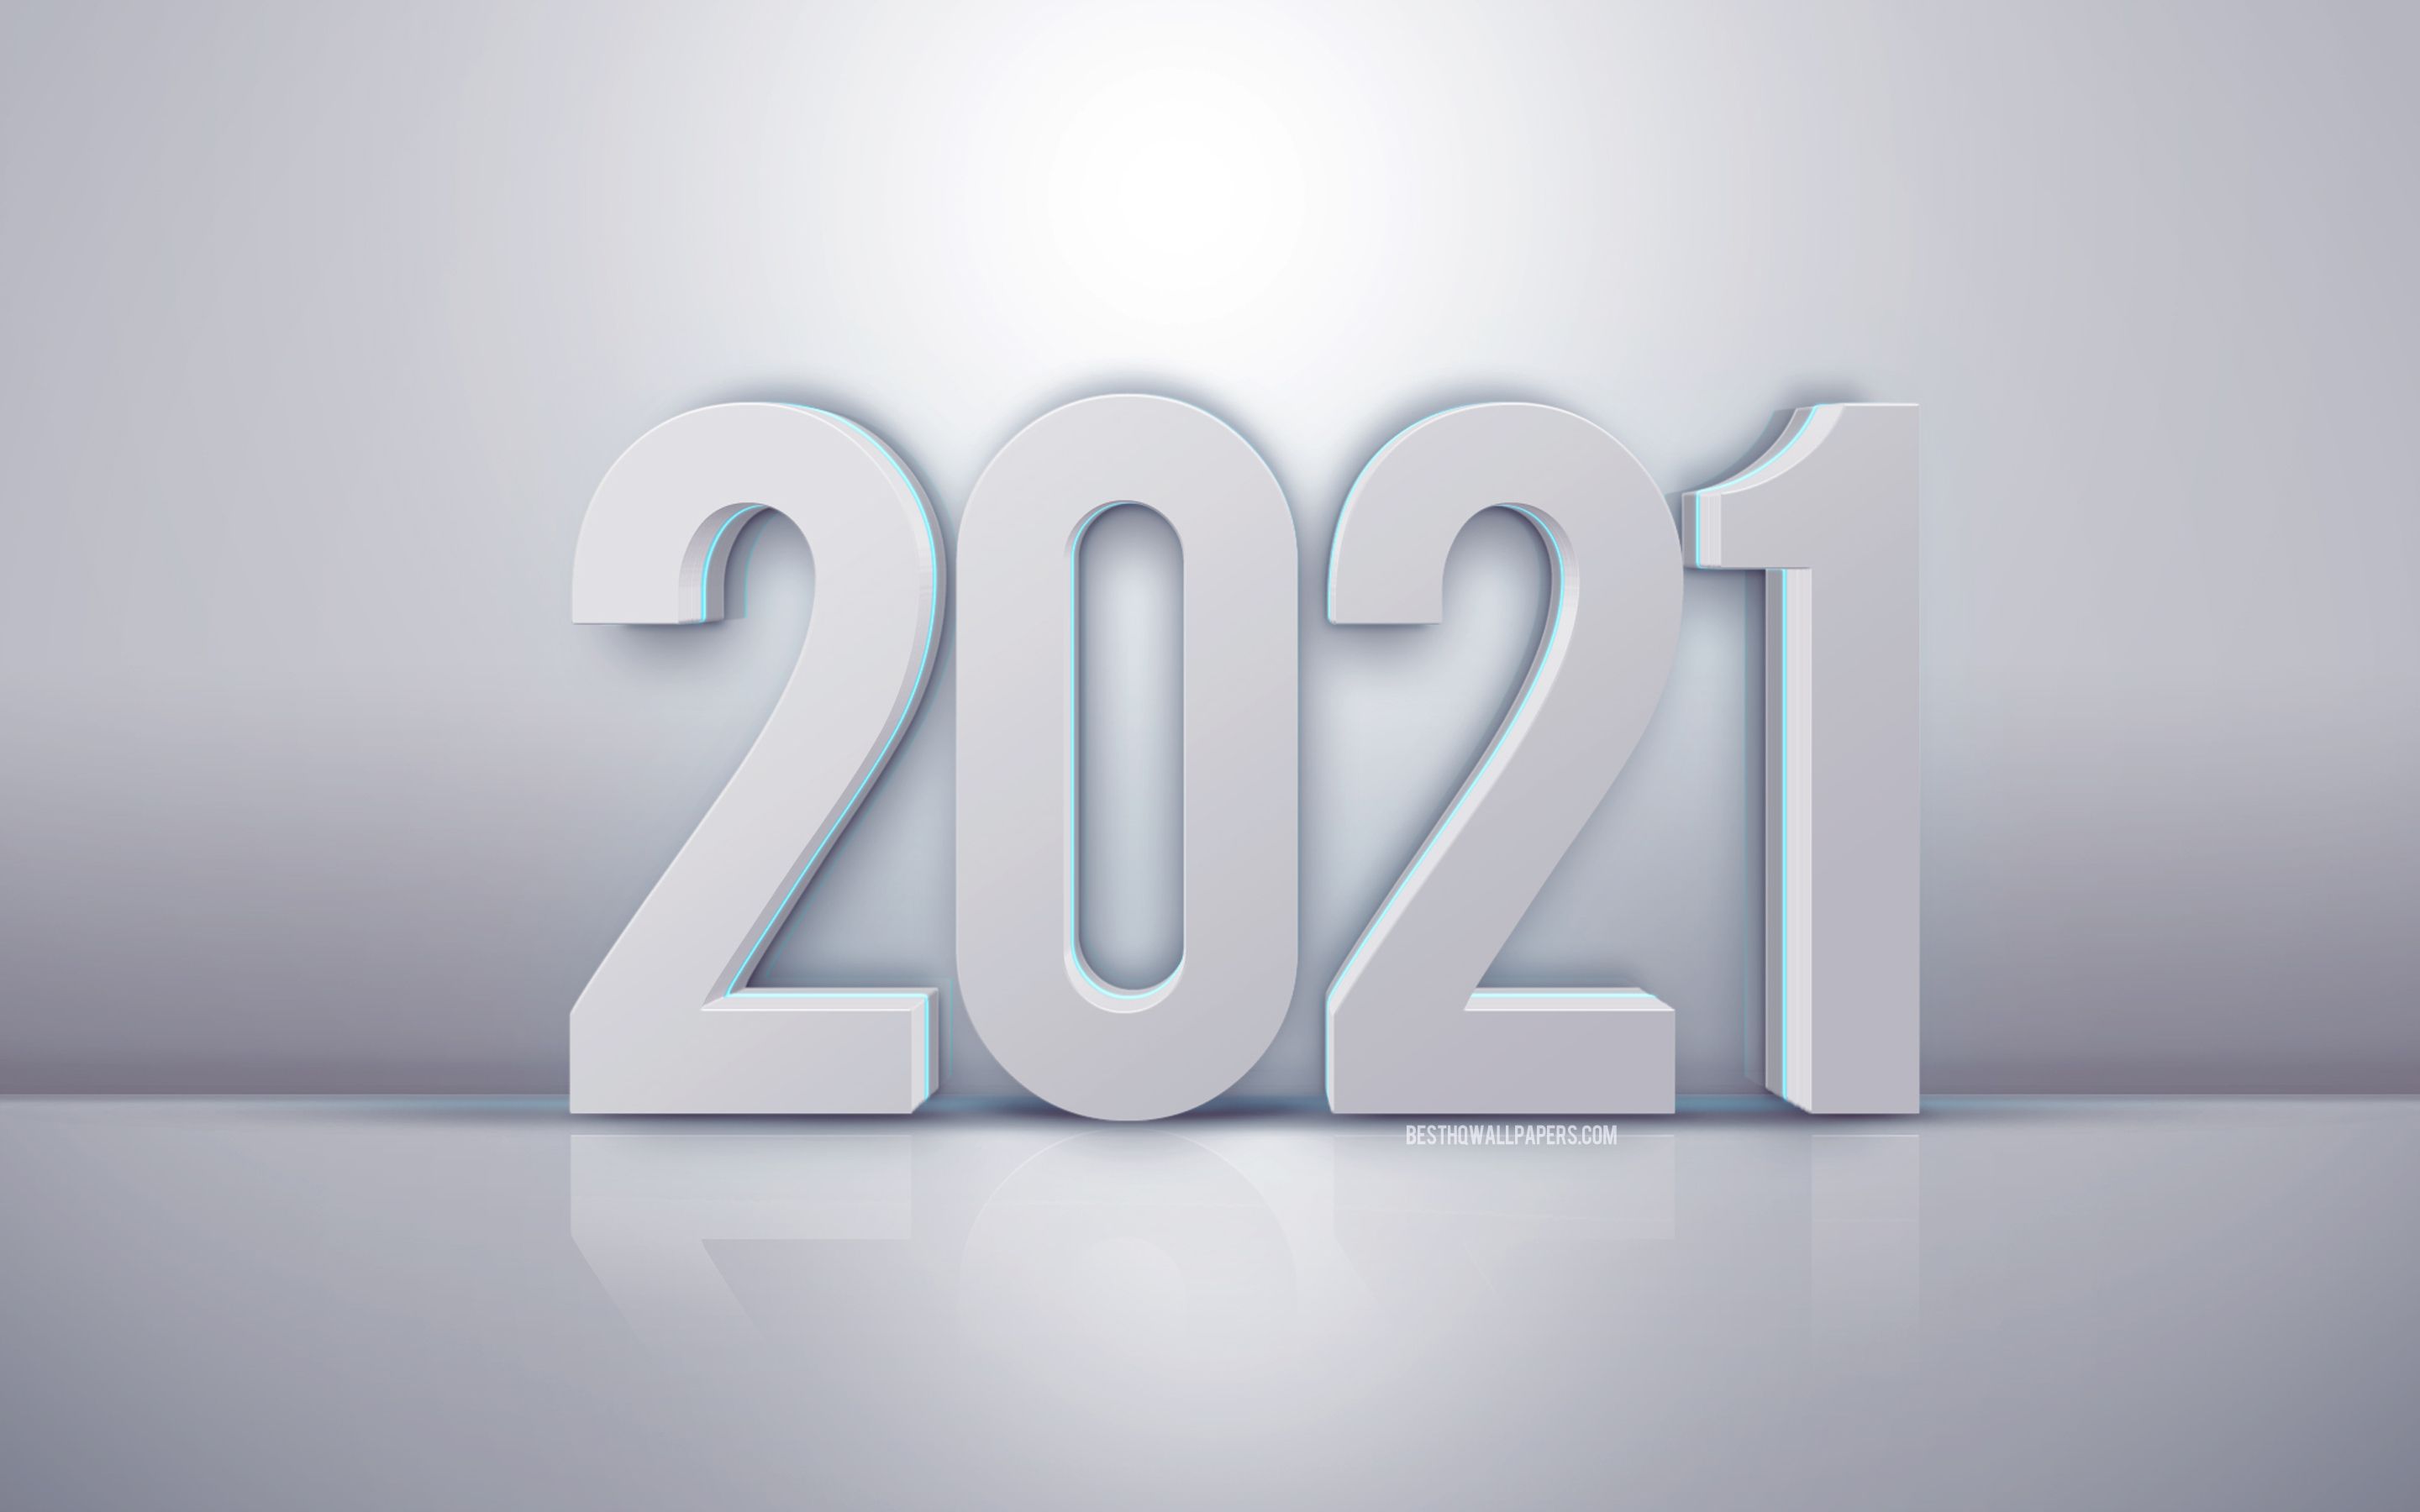 Download wallpaper 2021 New Year, white 3D letters, White 2021 background, 2021 3D art, white 3D 2021 background, Happy New Year 2021 concepts for desktop with resolution 2880x1800. High Quality HD picture wallpaper